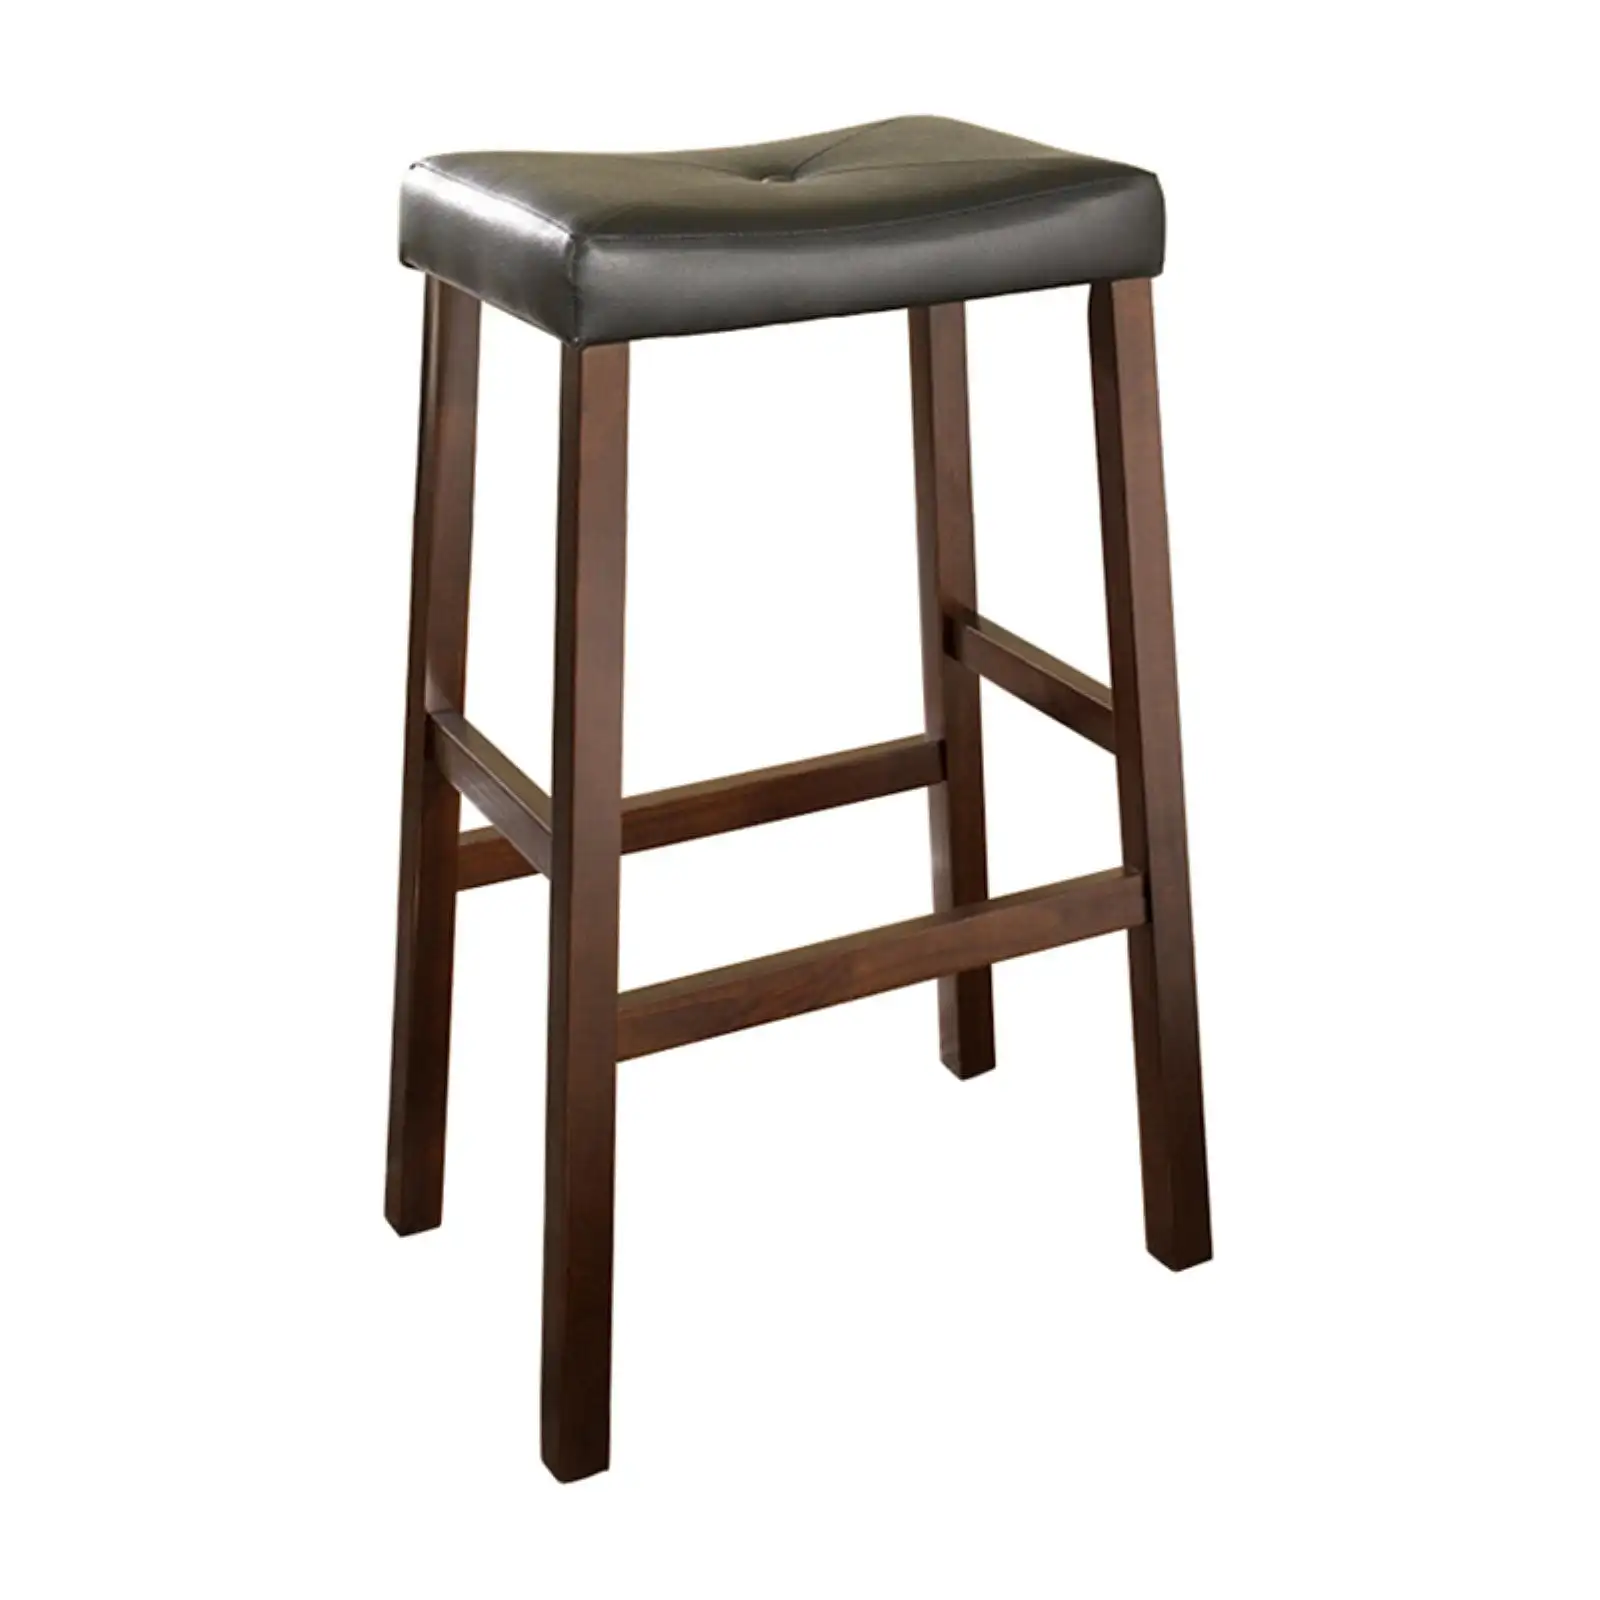 Crosley Furniture Upholstered Saddle Seat Bar Stool with 29" Seat Height 2pk